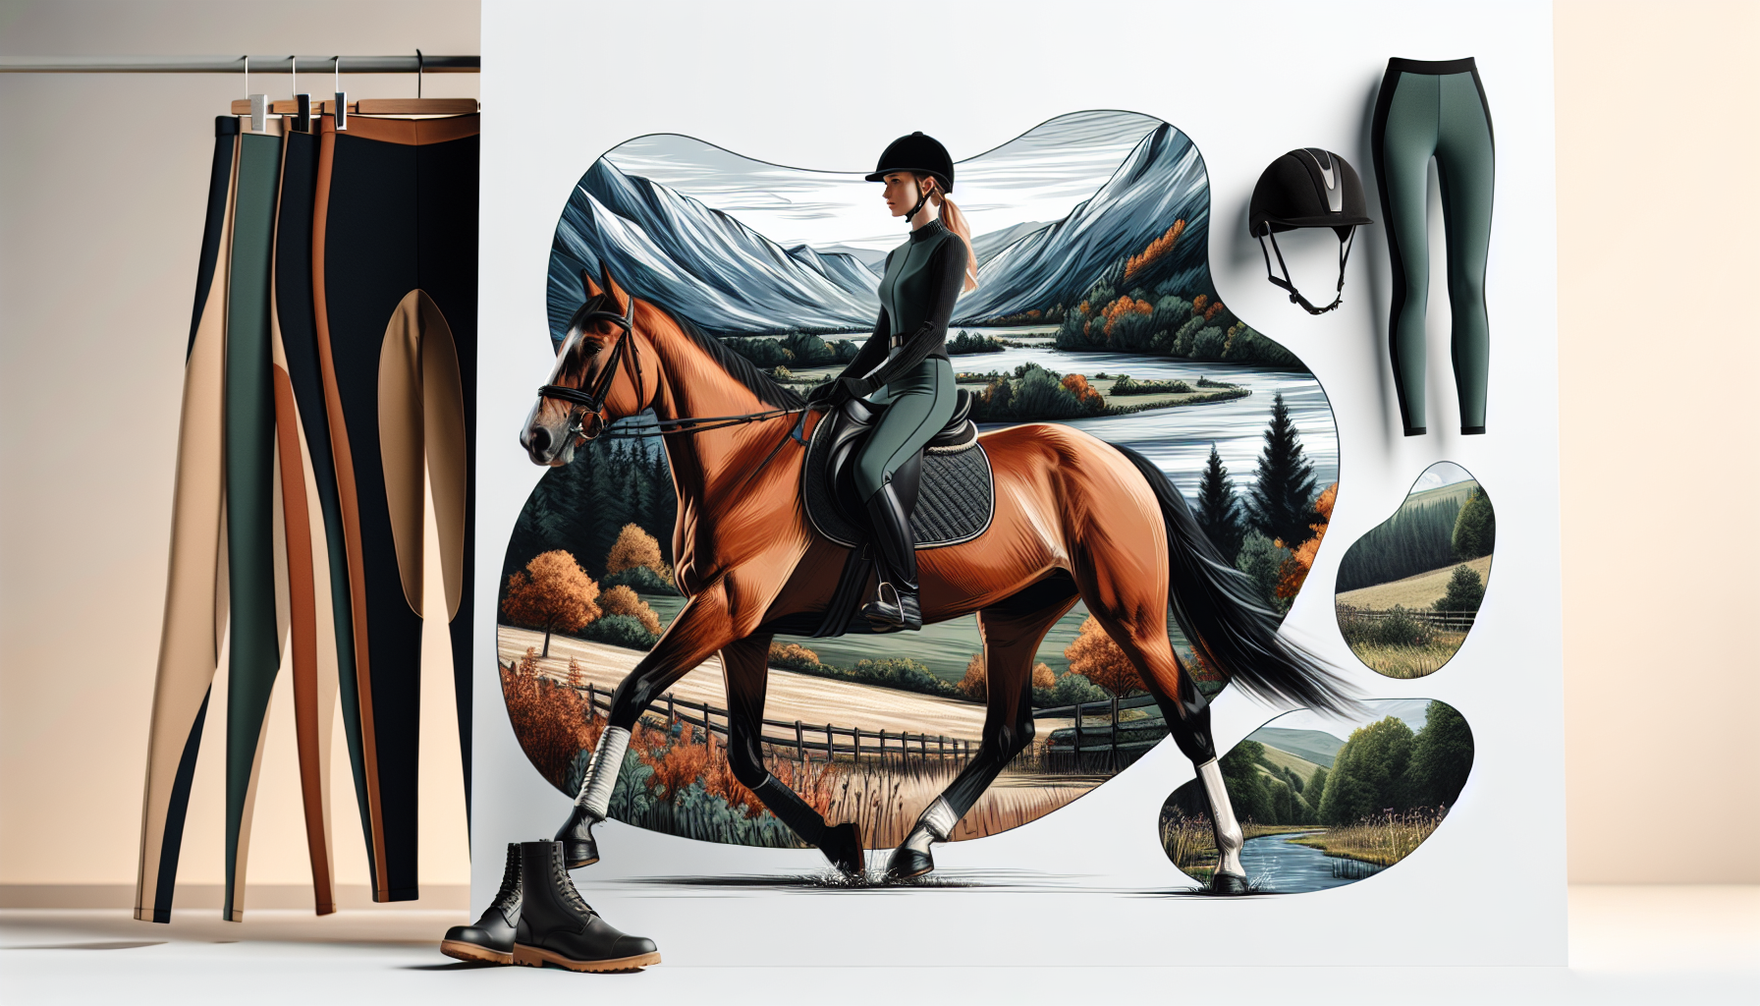 Picture a comfortably styled scene focusing on the use of riding leggings. Envision a Caucasian woman dressed in a pair of dark, form-fitting riding leggings, mounted on a vibrant chestnut horse. She'